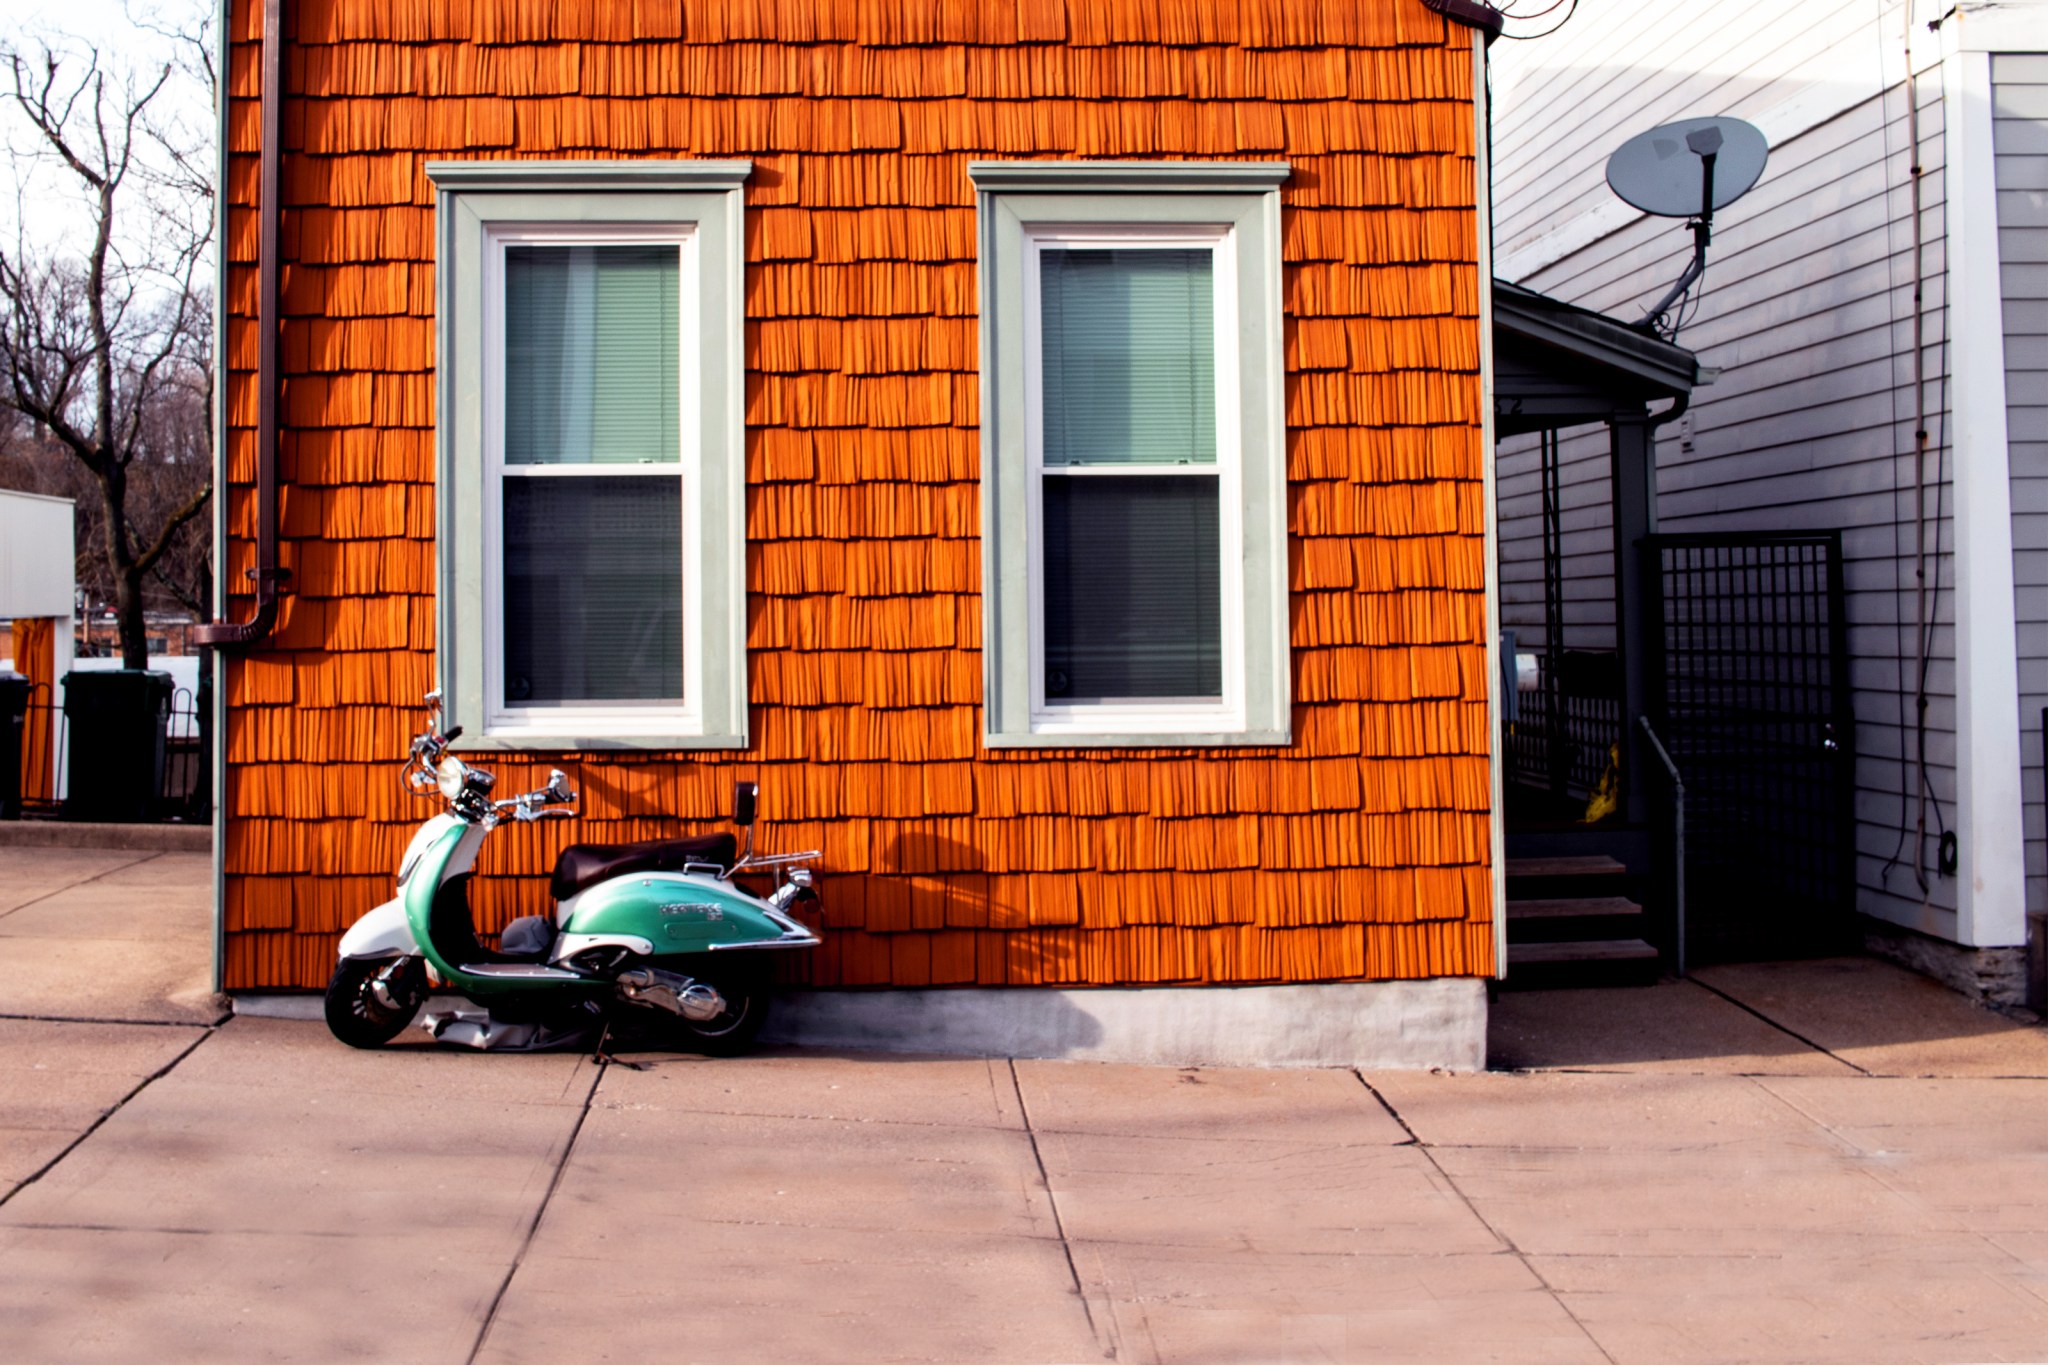 Wood-paneled house with green scooter resting against it